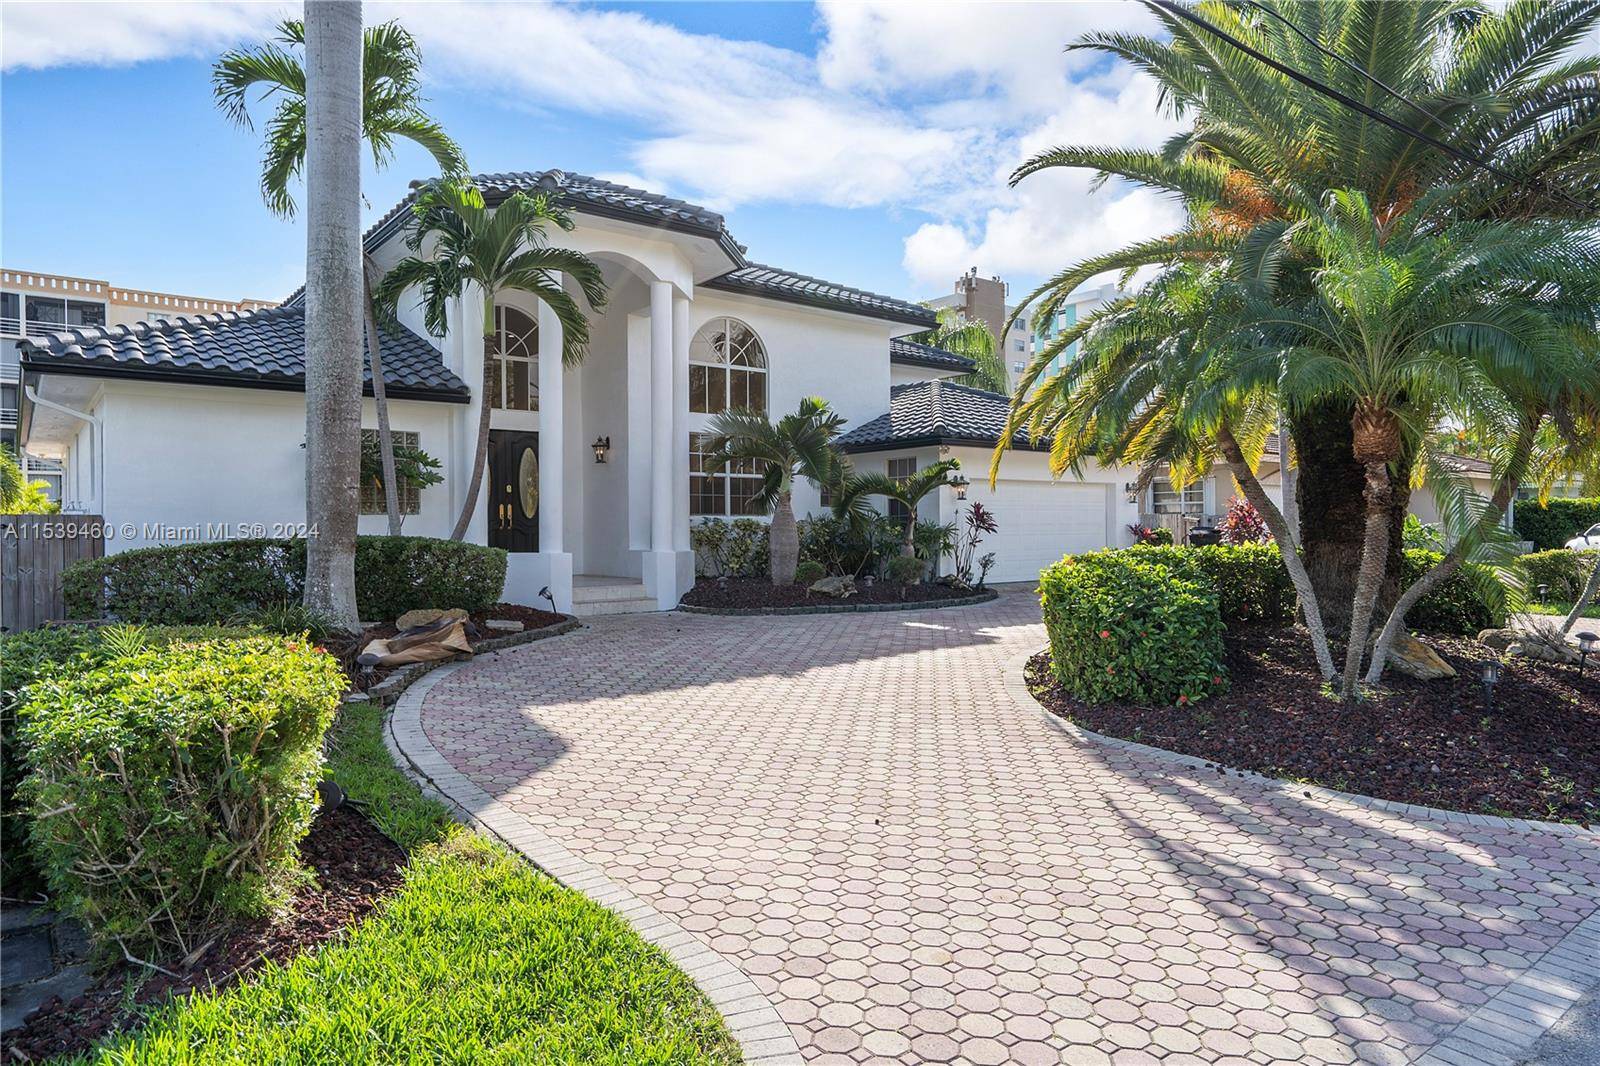 Stunning waterfront home in the desirable Eastern Shores.